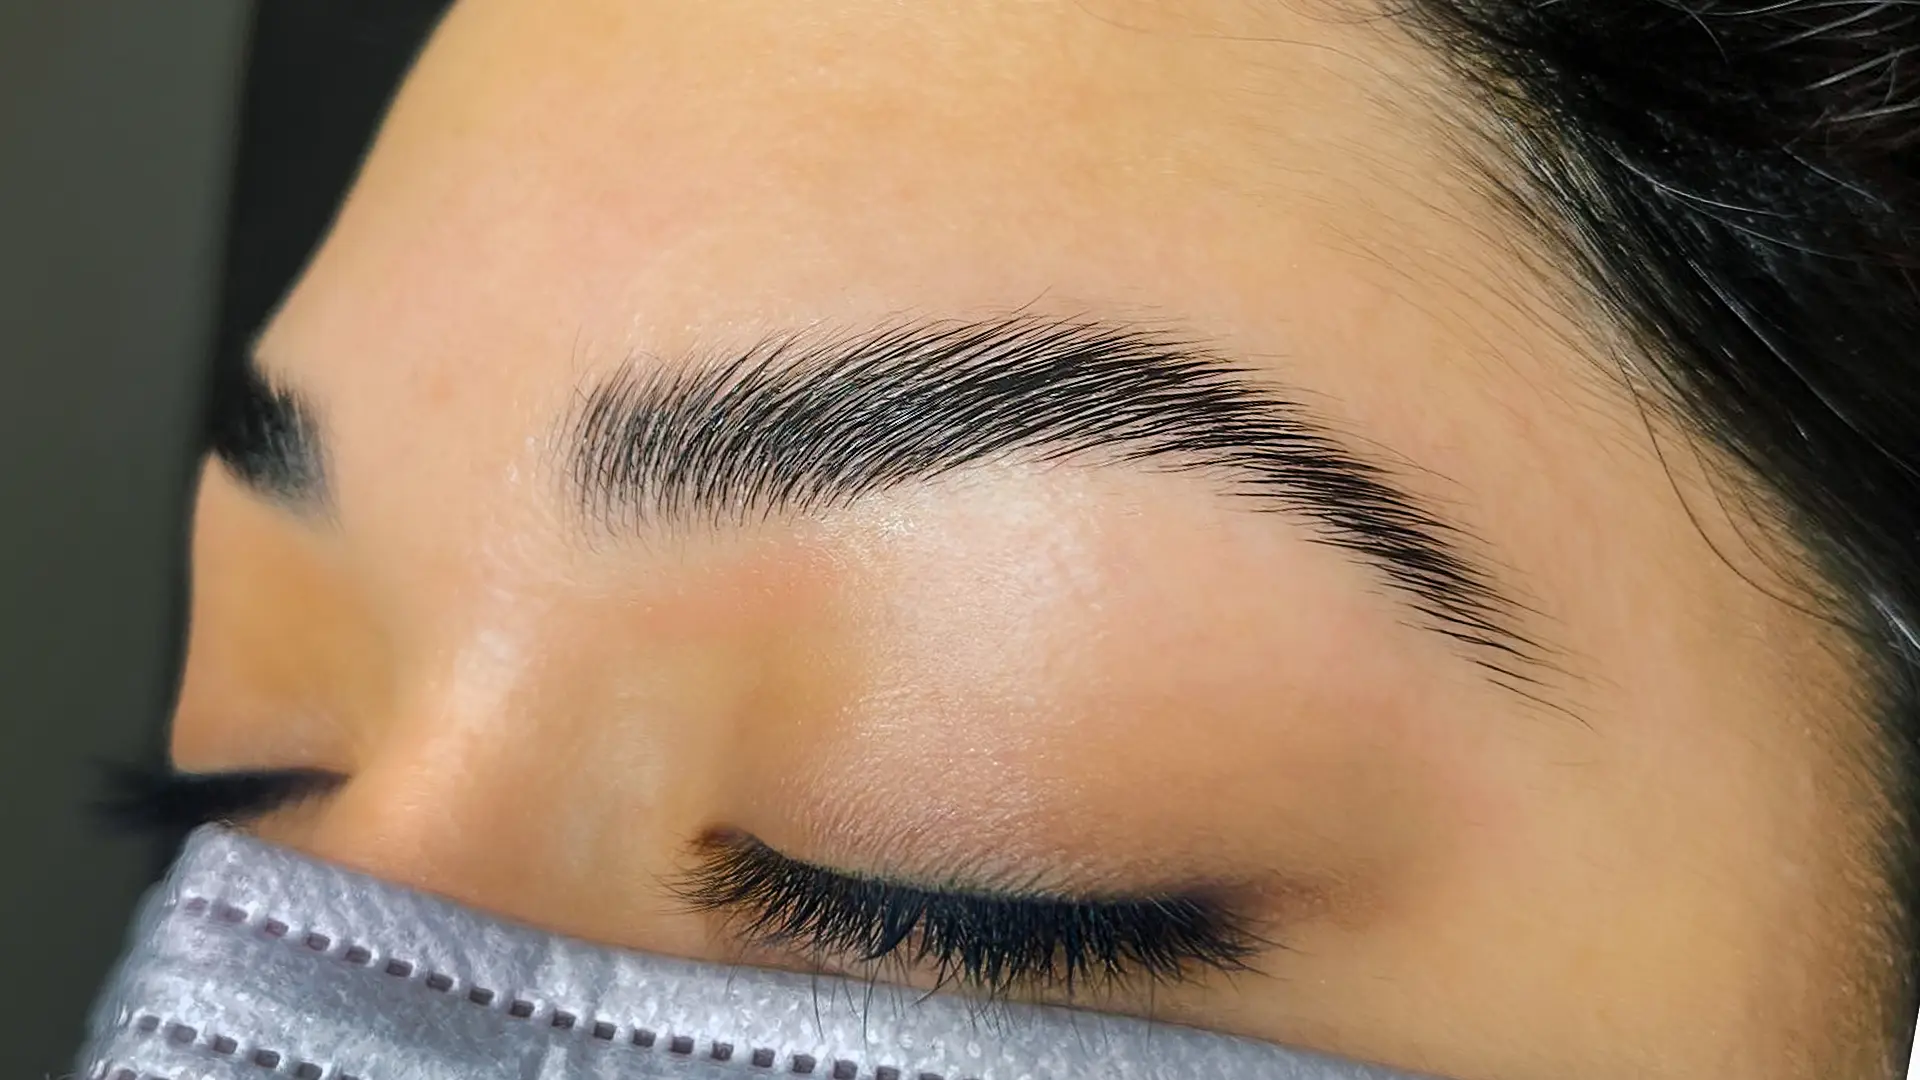 Image of a Brow Lamination done at On Fleek Studio for the Brow Laminations vs Microblading beauty blog post.